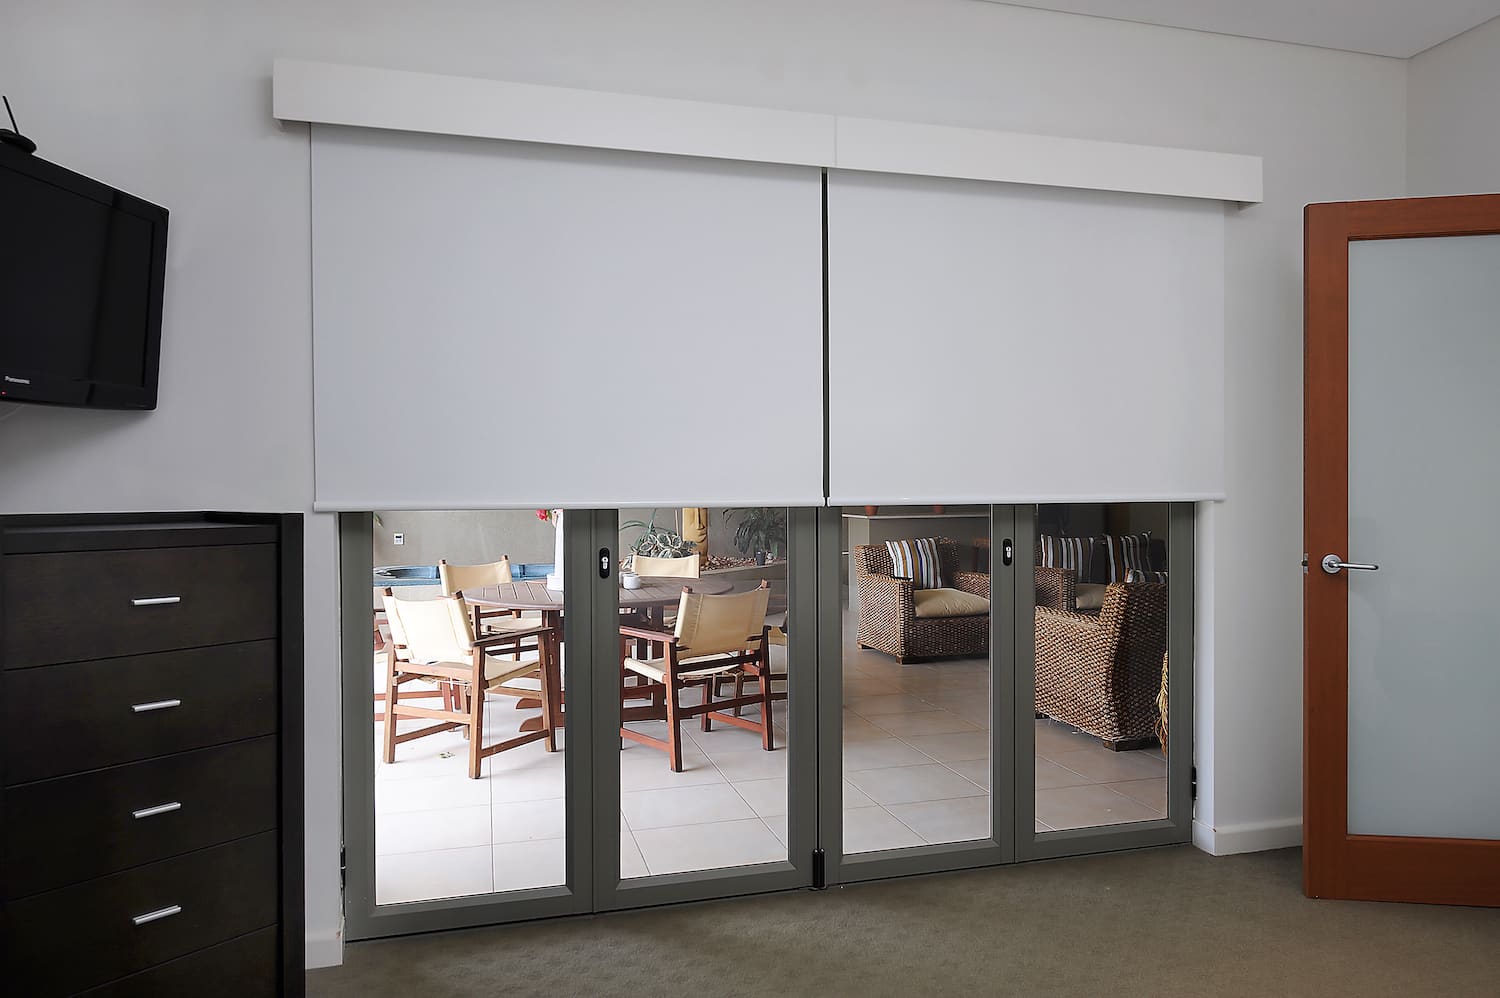 Blockout Blinds with Pelmet offered by Macarthur in Campbelltown